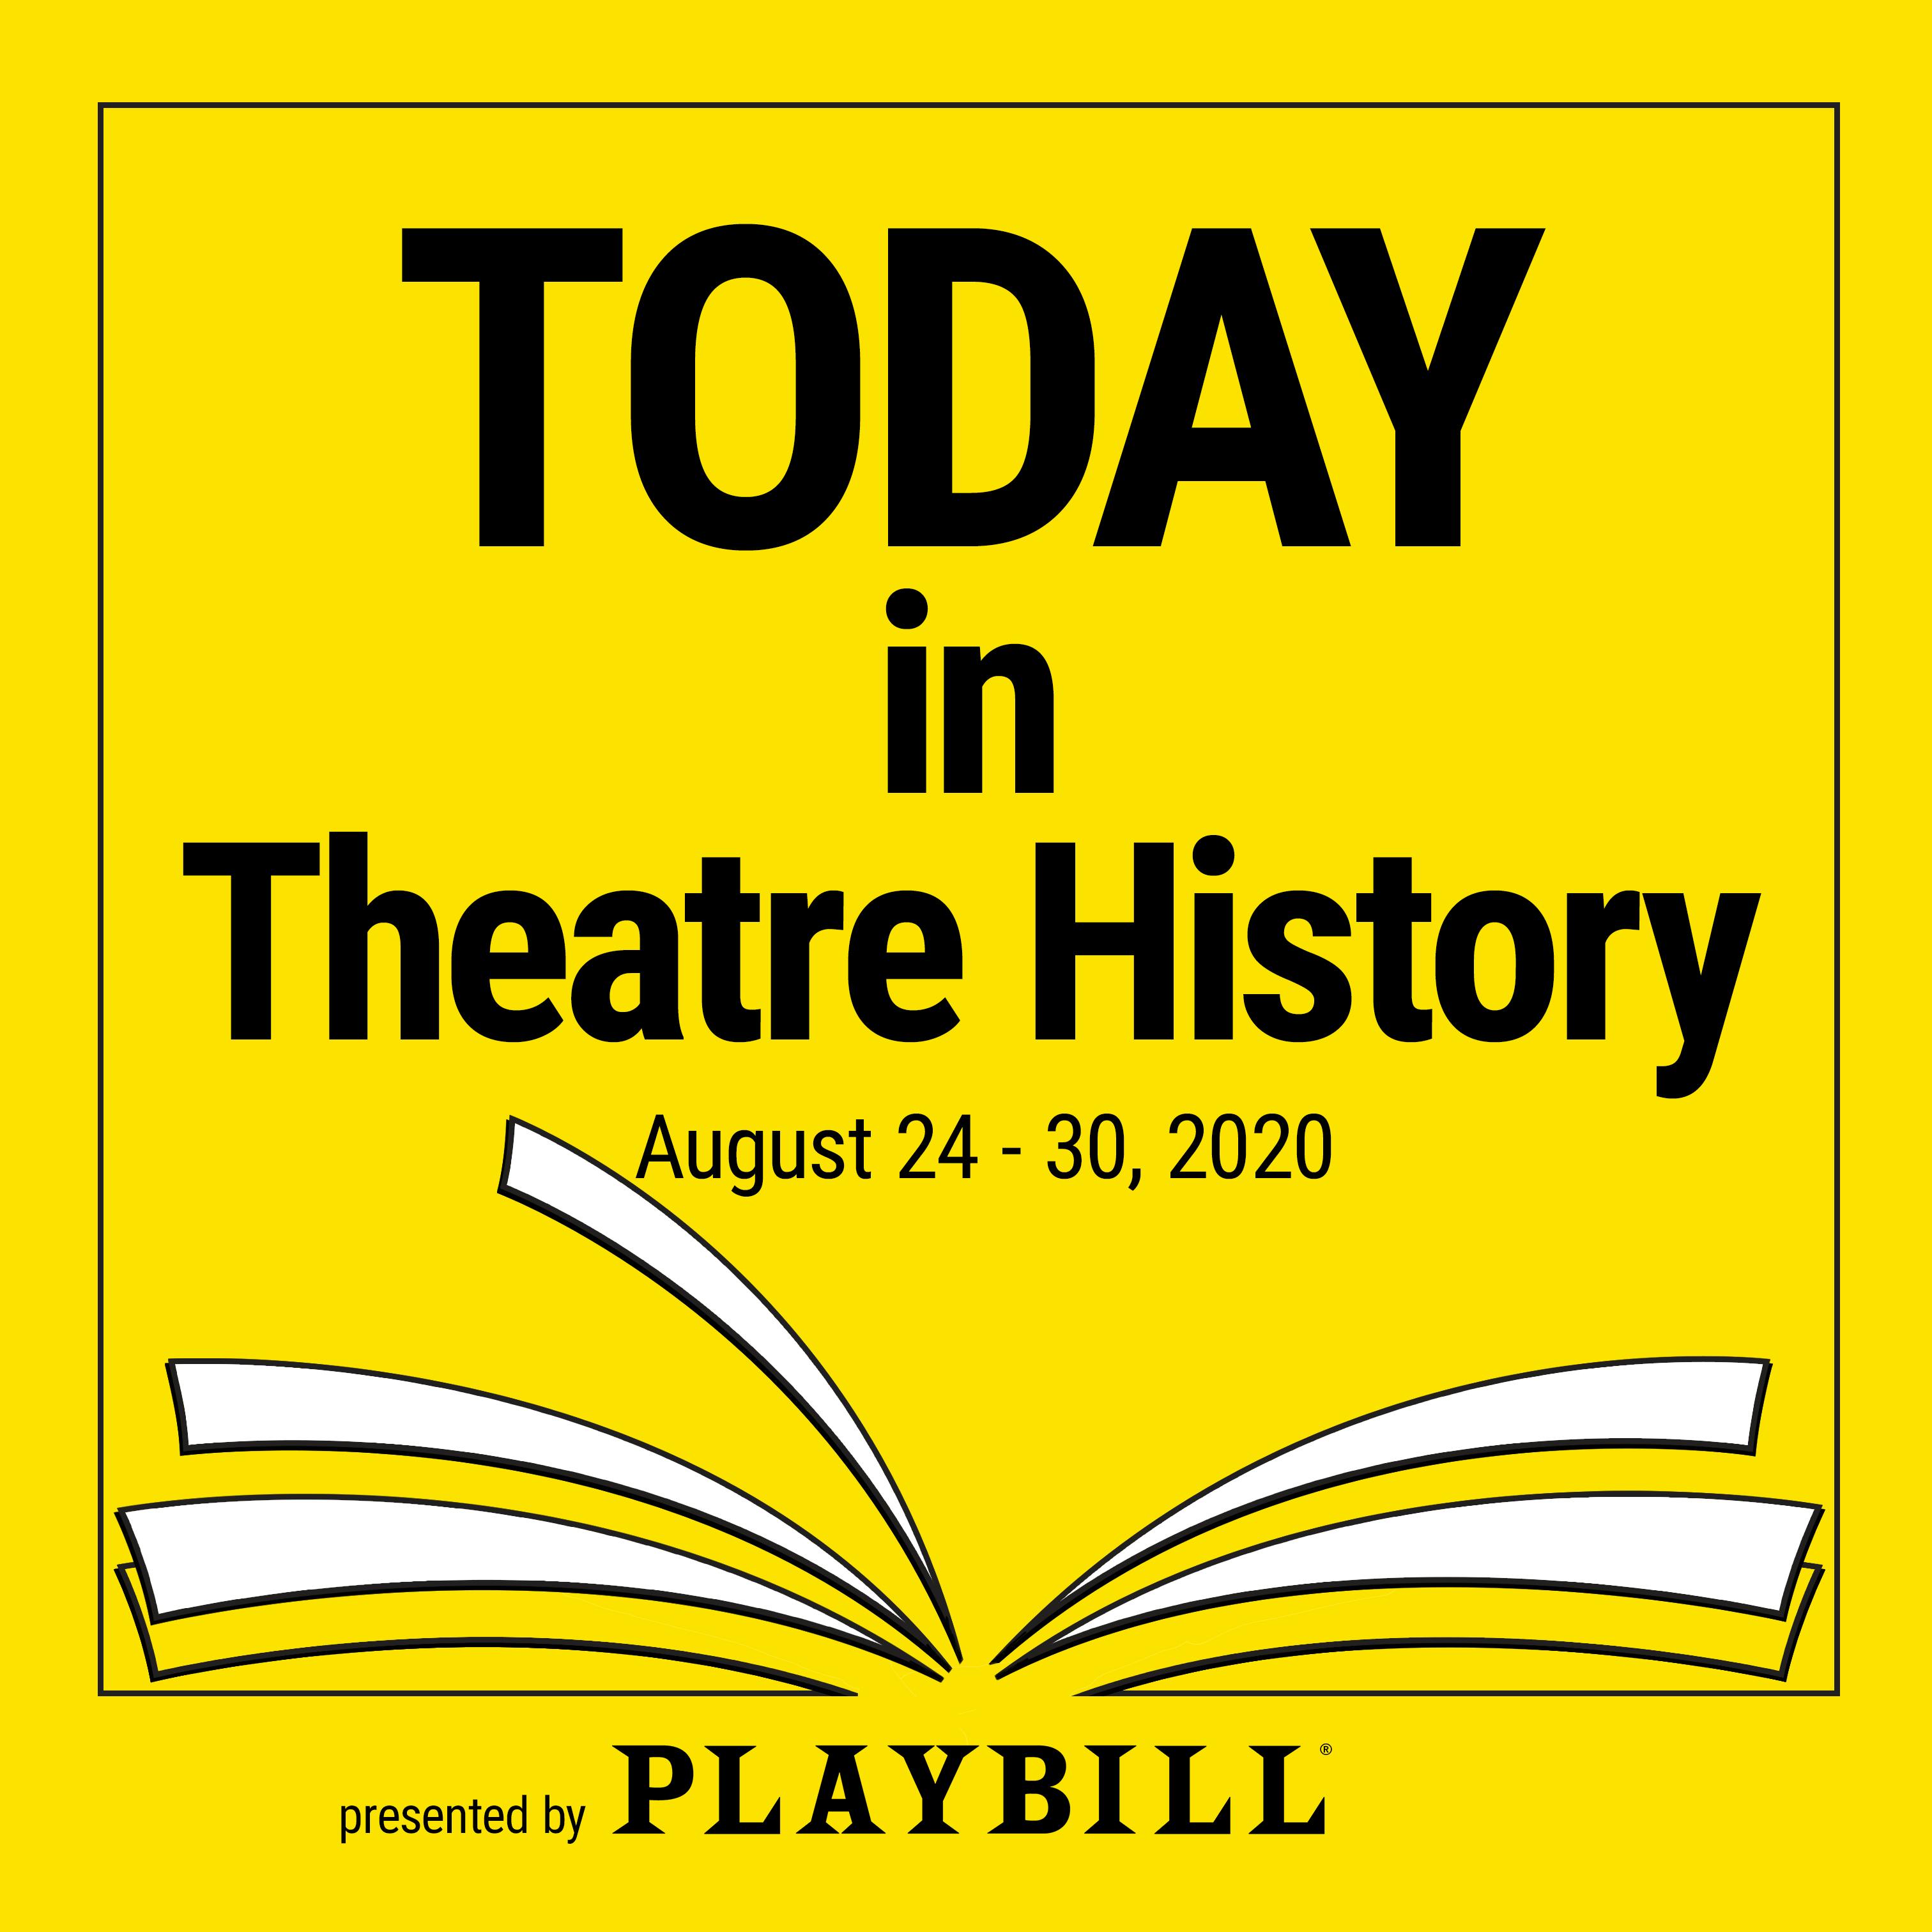 August 24–30, 2020: Largely forgotten today but the longest-running Broadway play for two decades at one time, Lightin’ opens in 1918, while 42nd Street opens in 1980.